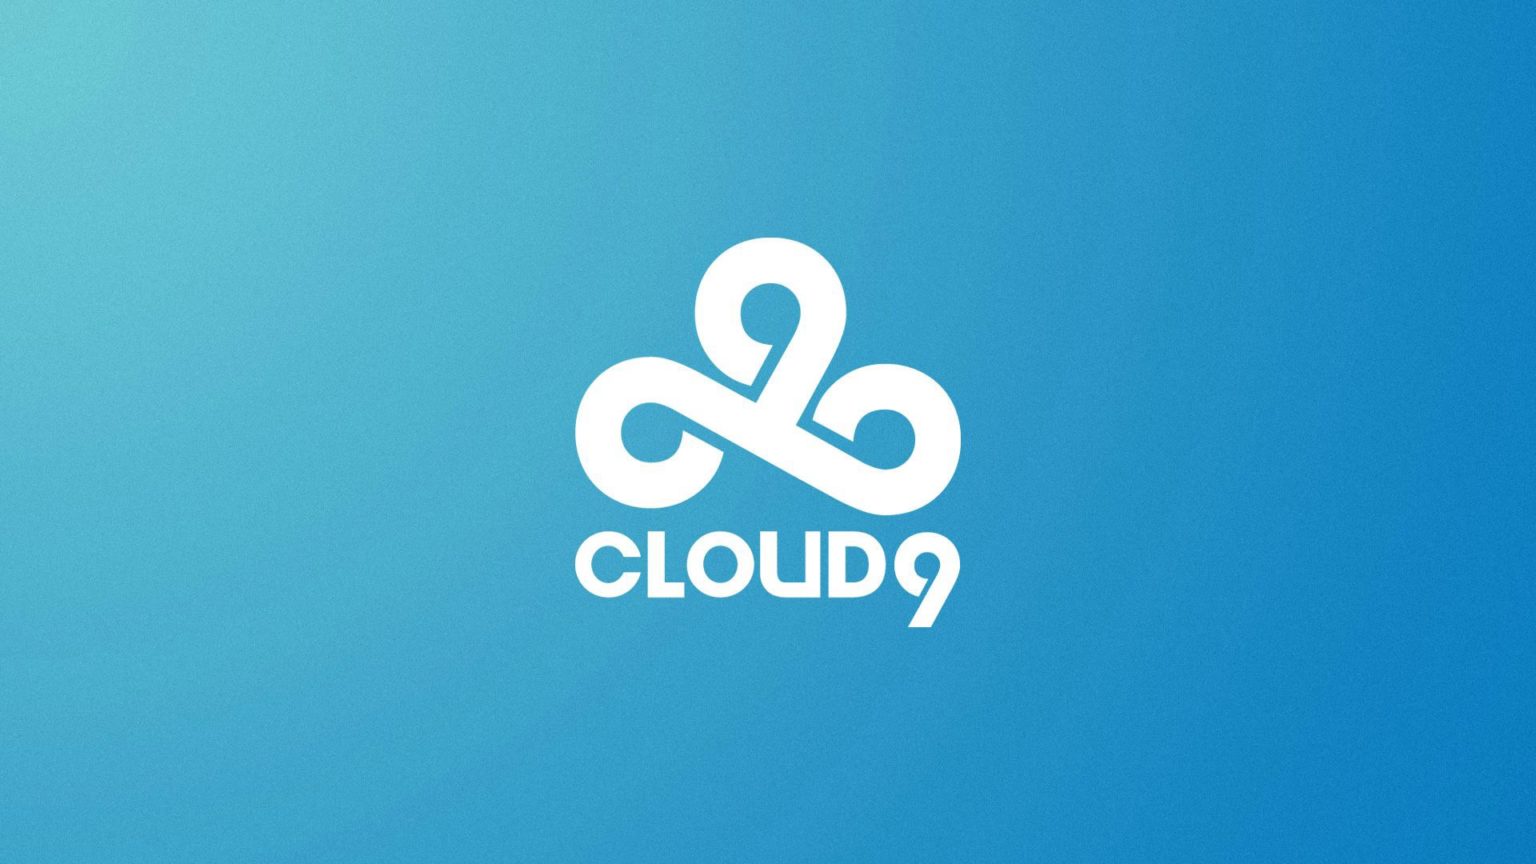 cloud9 defeated 2022 fures in the opening match of na vct 100